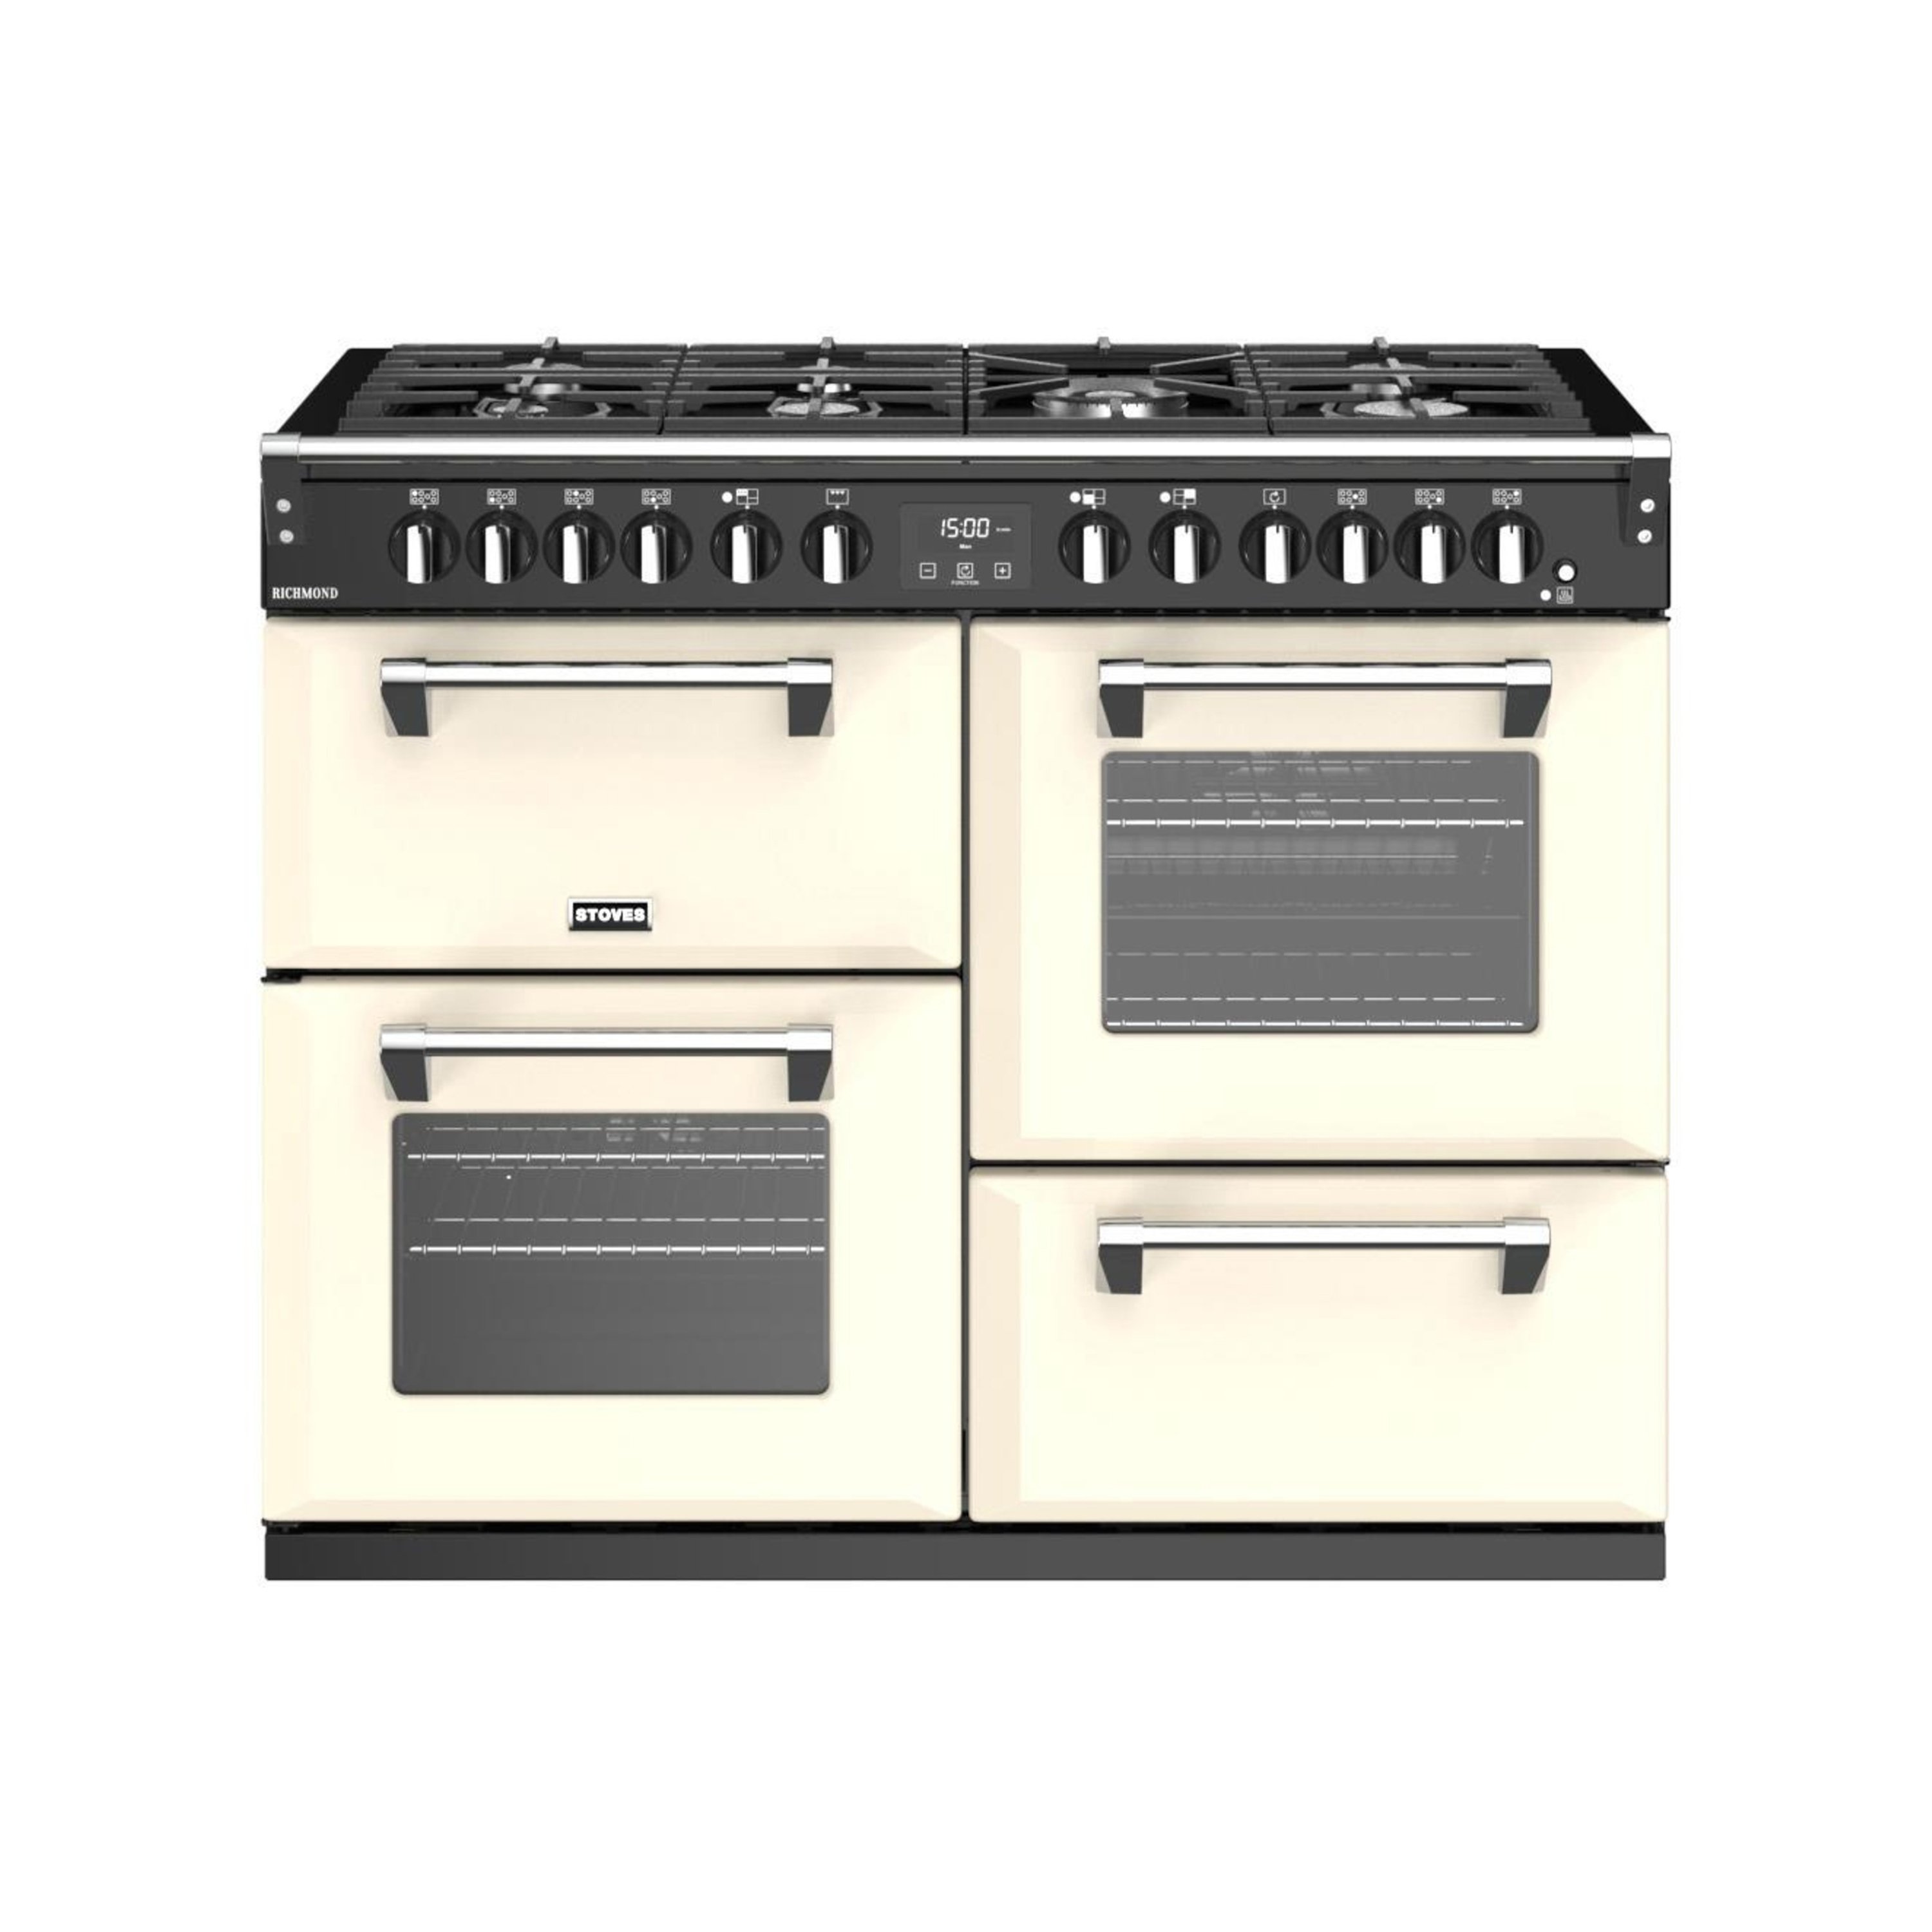 110cm dual fuel range cooker with a 7 burner gas hob, conventional oven & grill, multifunction main oven, fanned second oven, and dedicated slow cook oven